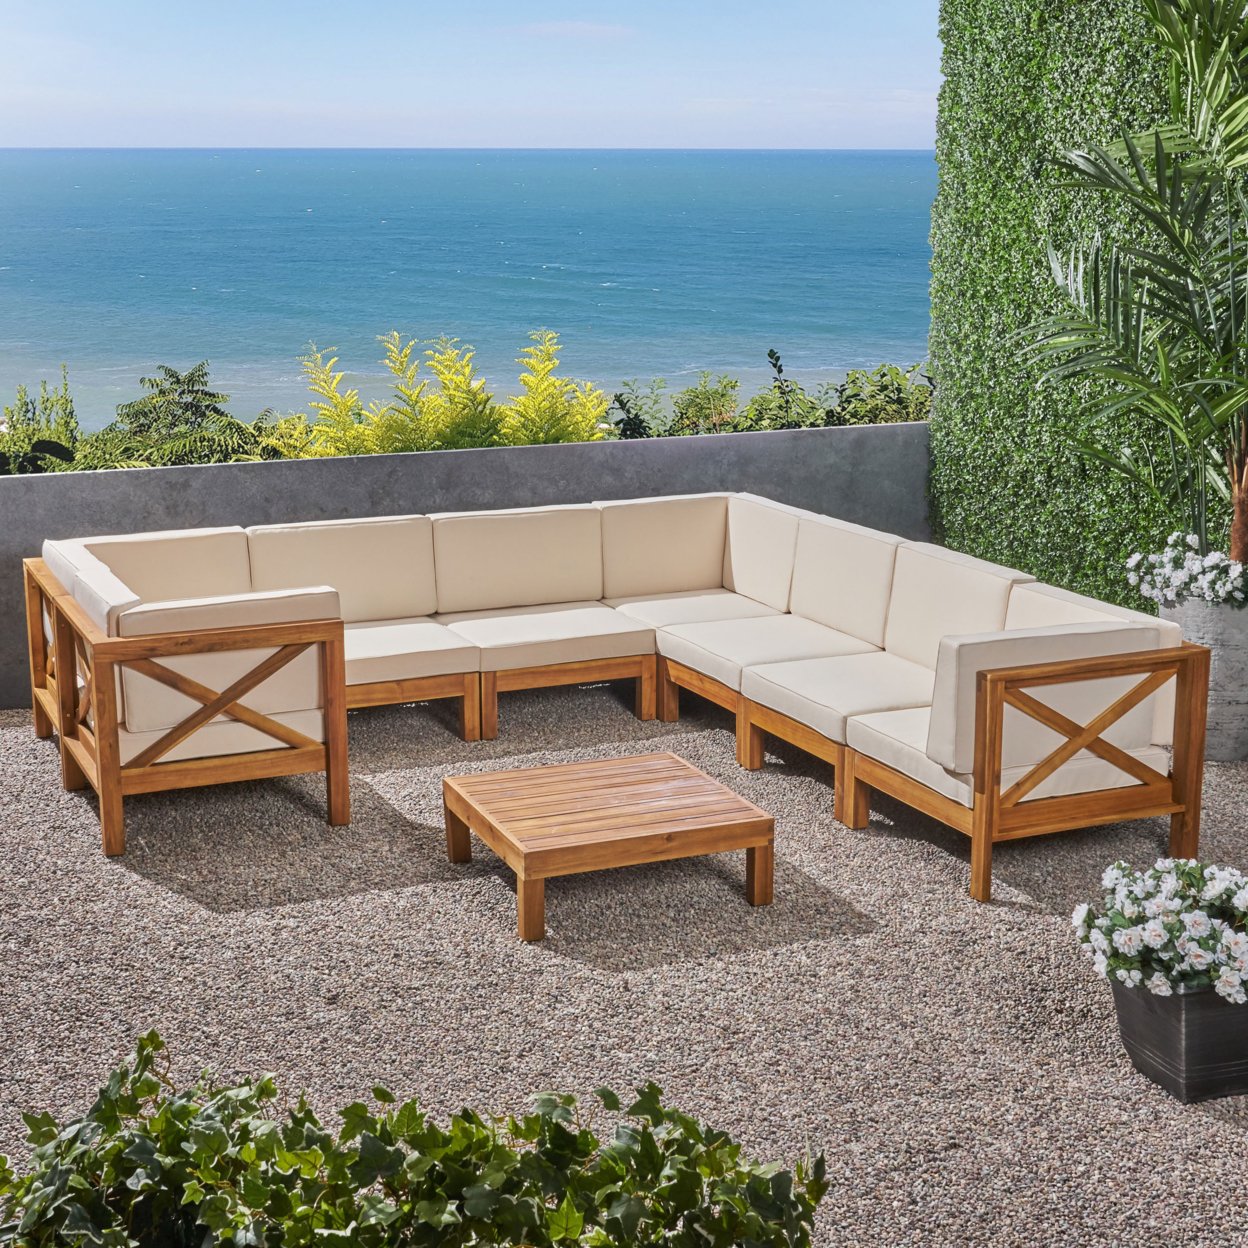 Brava Outdoor Acacia Wood 8 Seater U-Shaped Sectional Sofa Set With Coffee Table - Beige